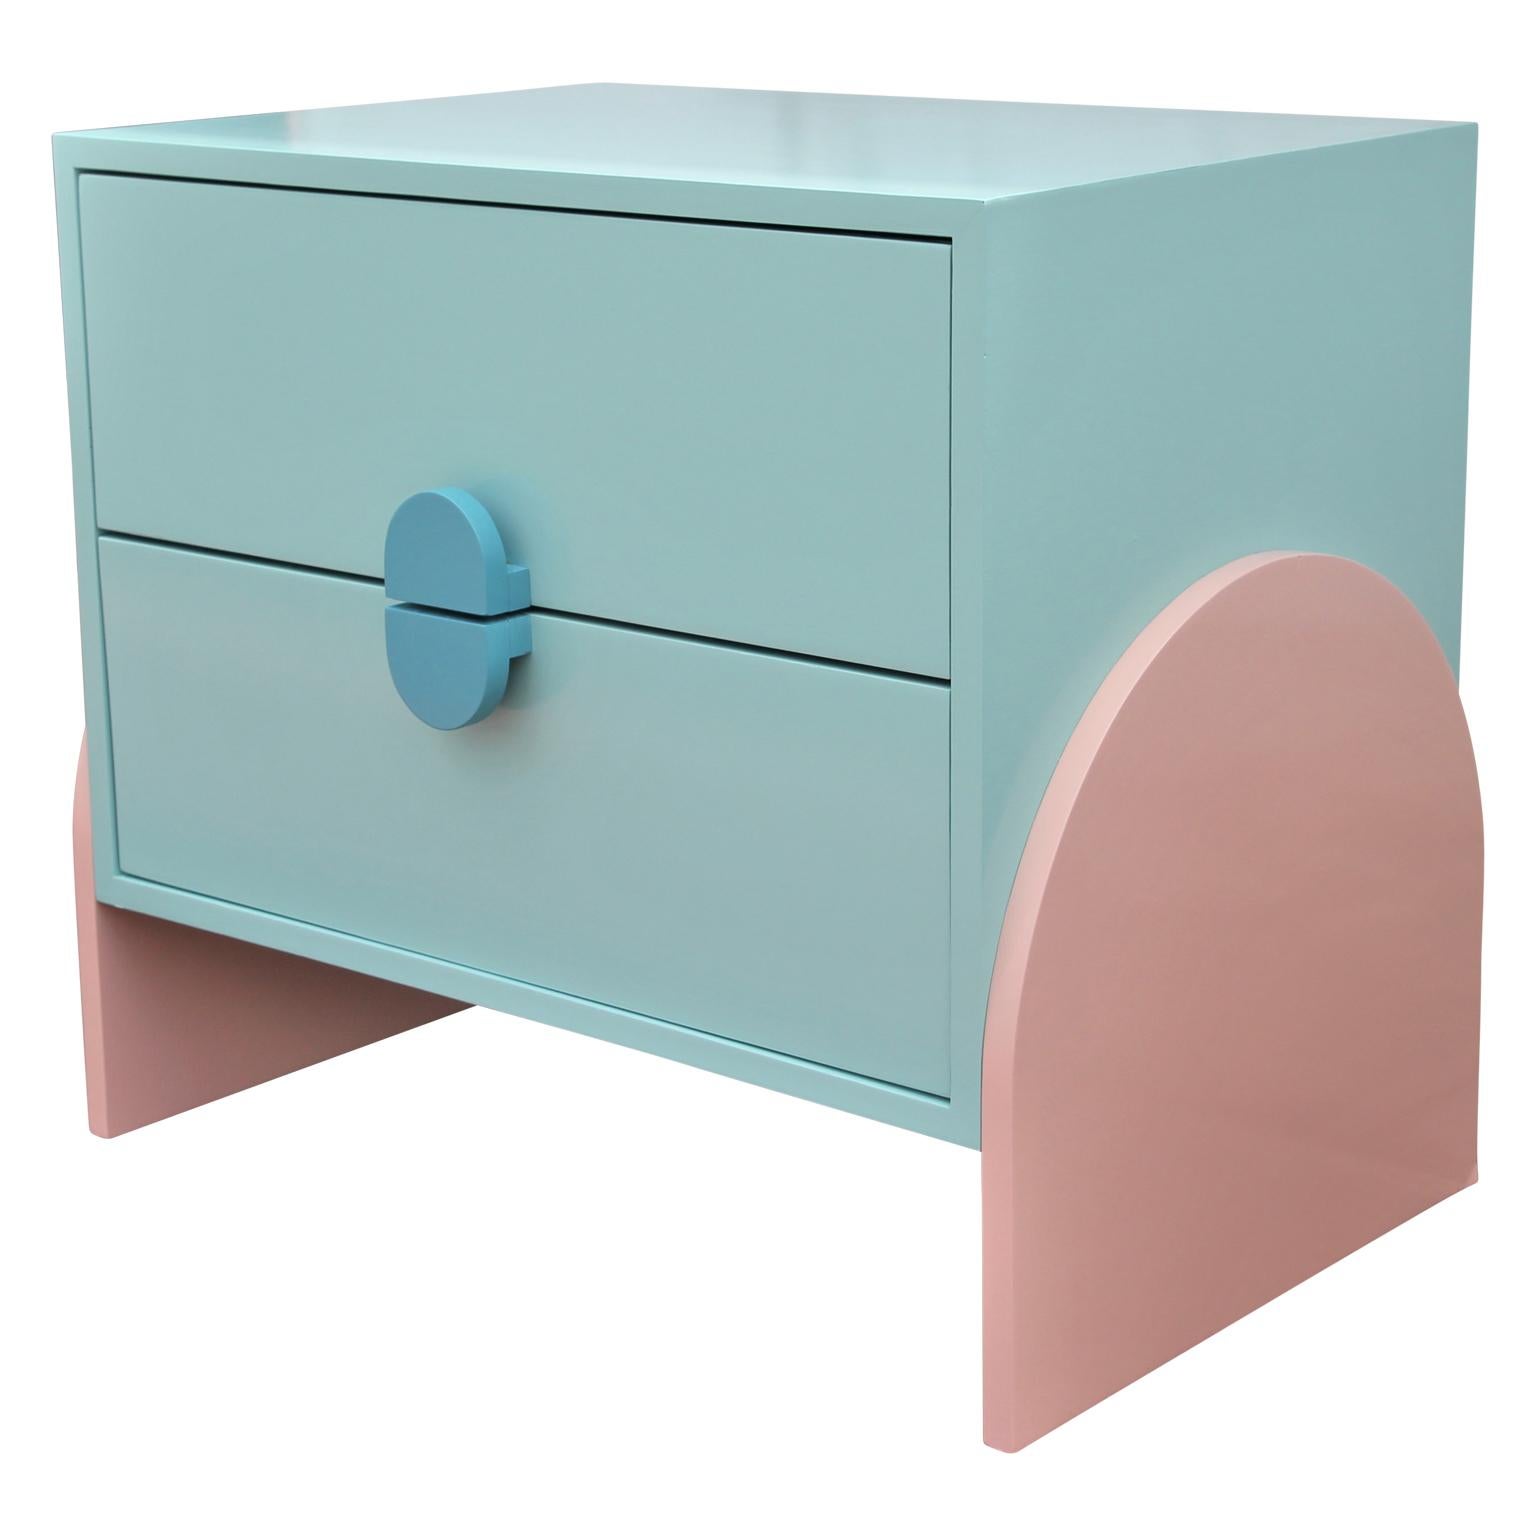 Custom Post-Modern Light Blue and Pink Night Stands 1